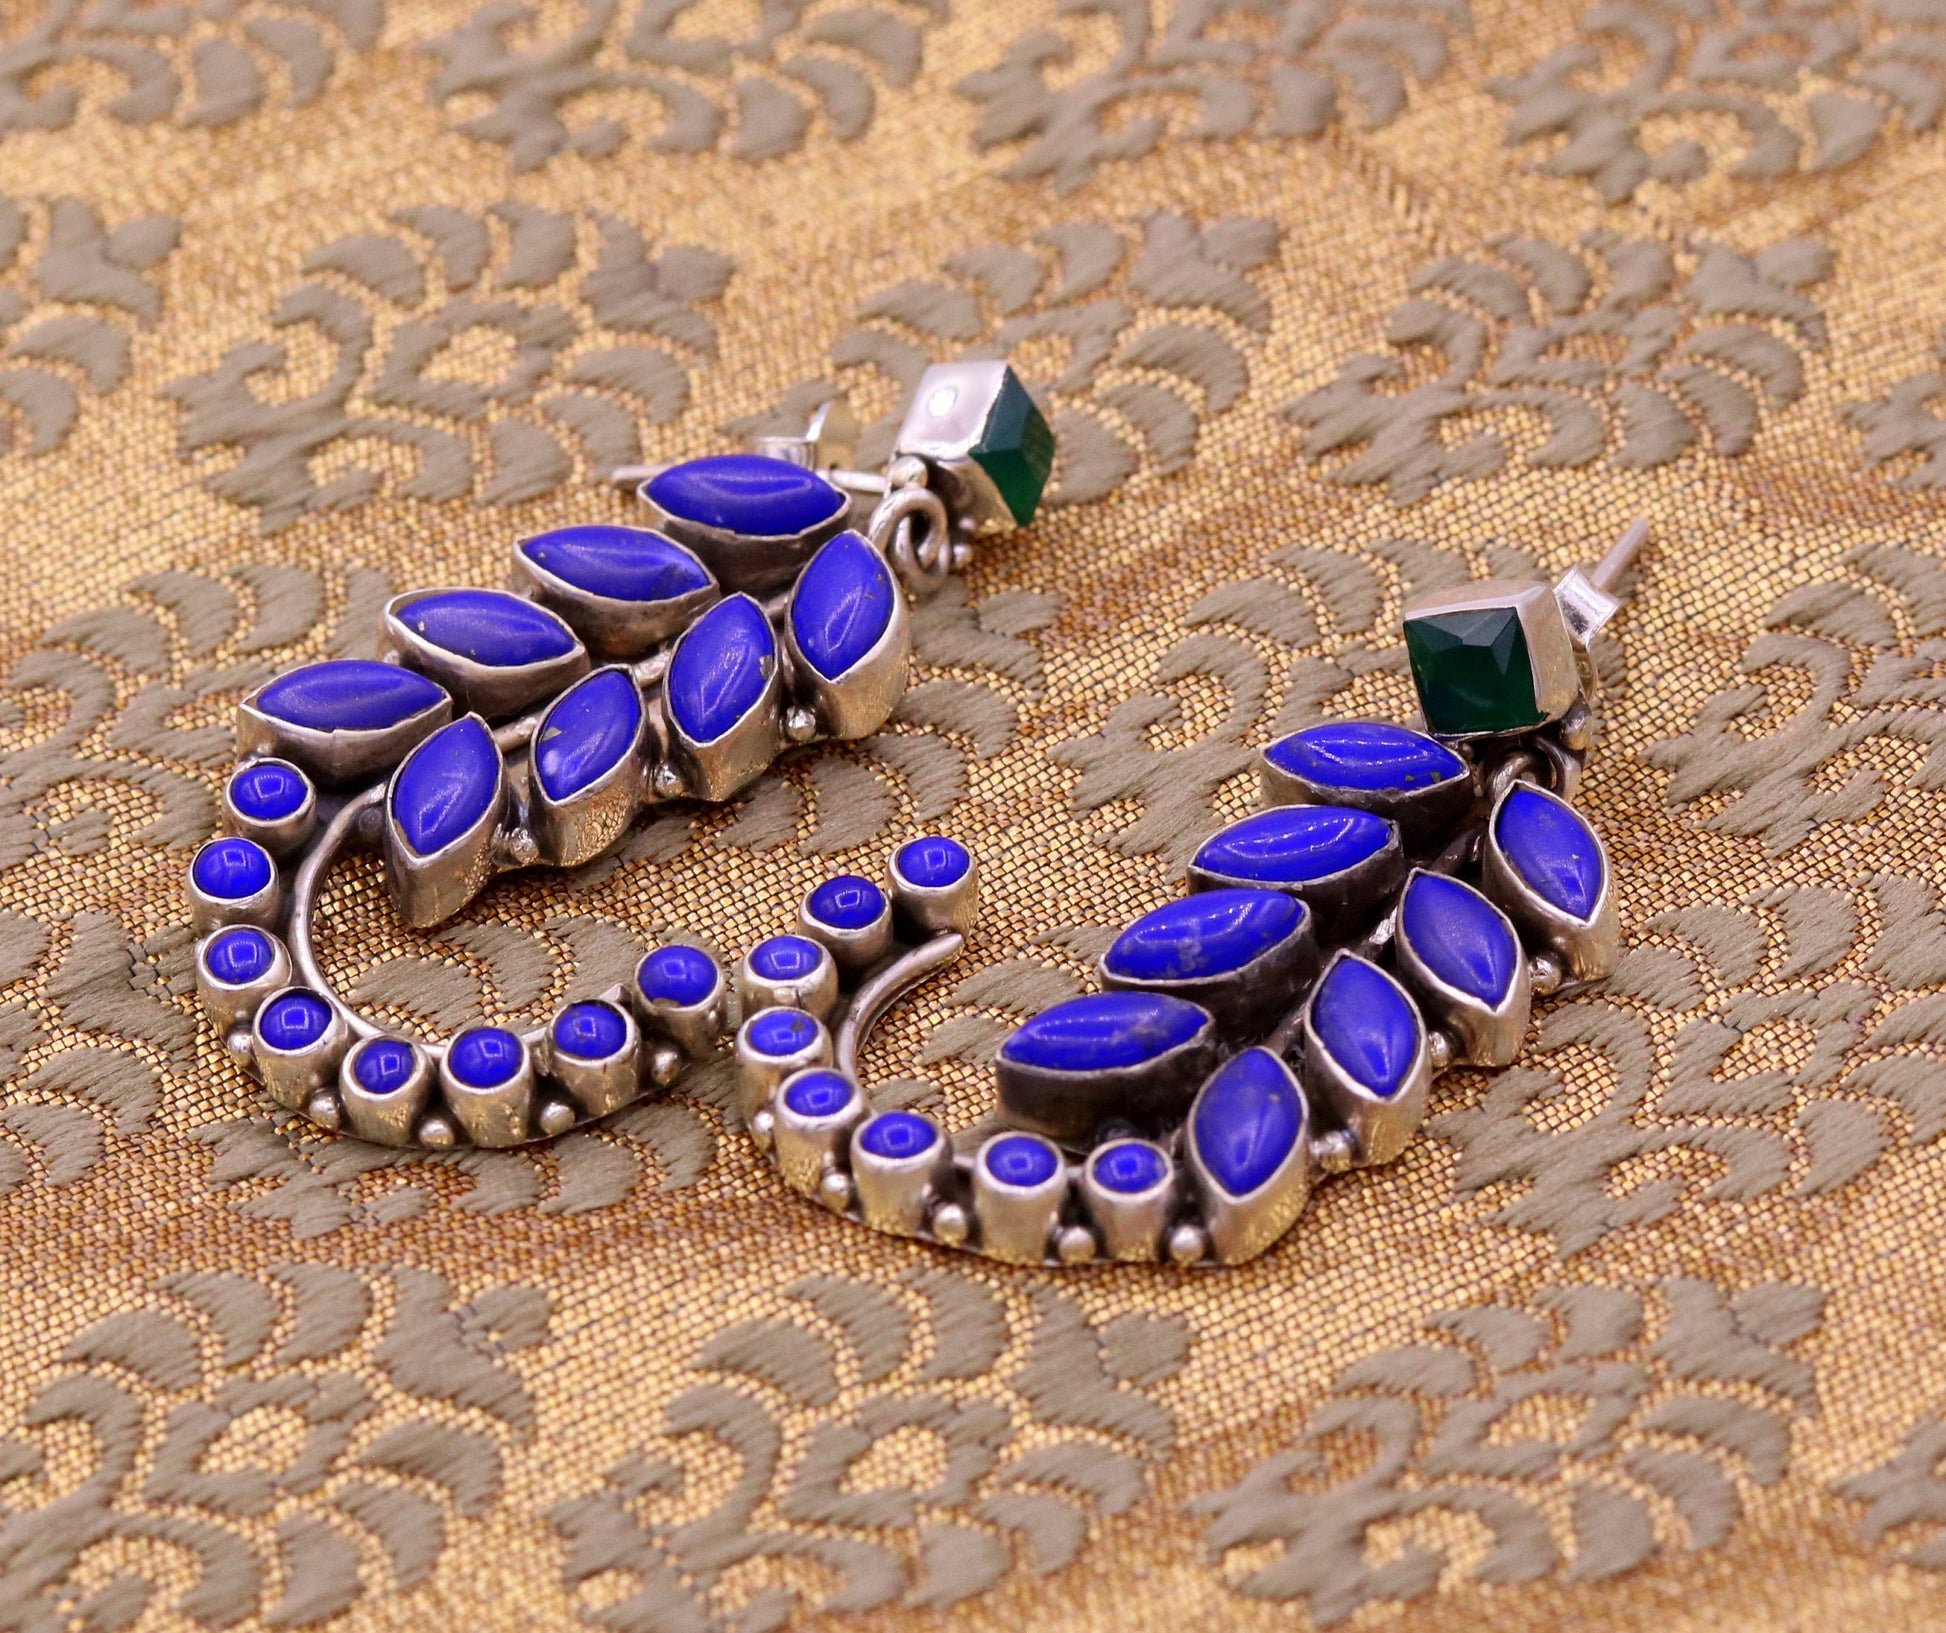 925 Sterling silver handmade fabulous leaf style designers gemstone jadau stud earring, excellent silver ear jewelry for gifting s721 - TRIBAL ORNAMENTS